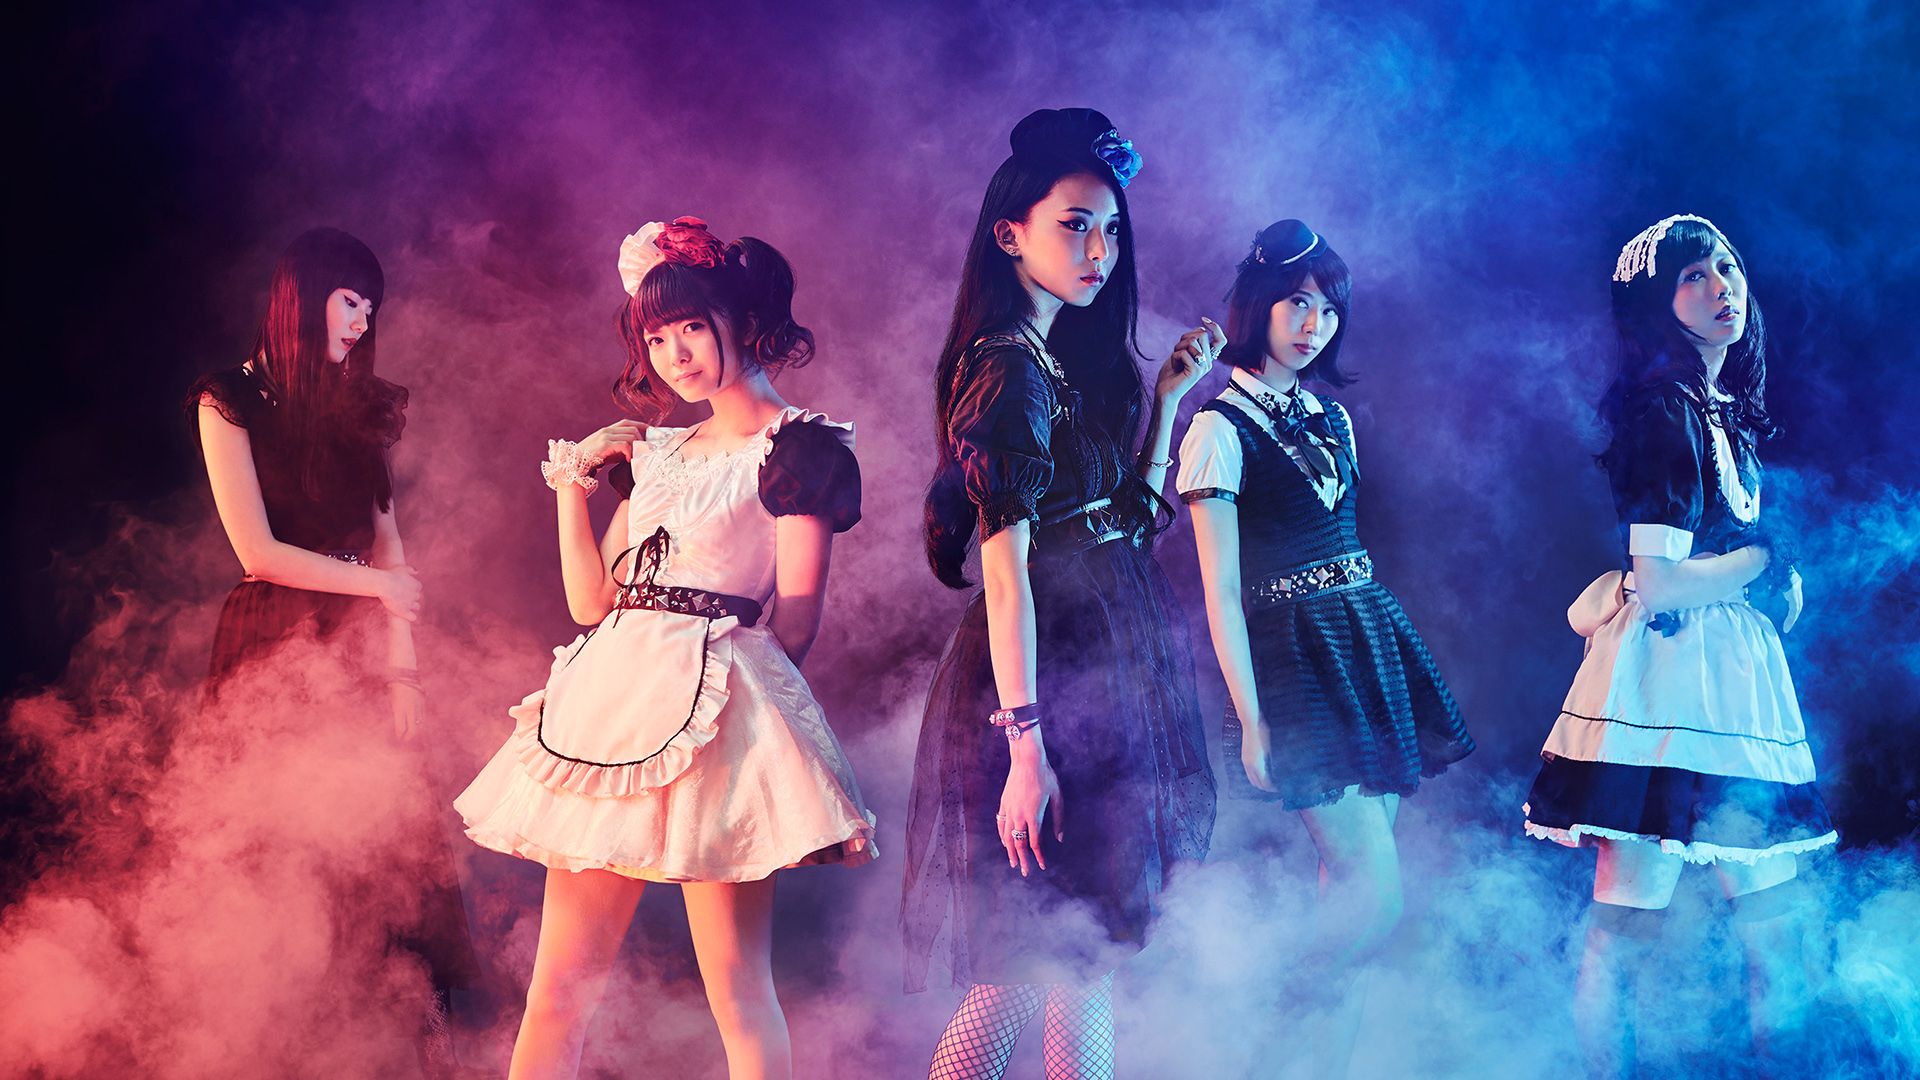 Band Maid Wallpapers Wallpaper Cave.